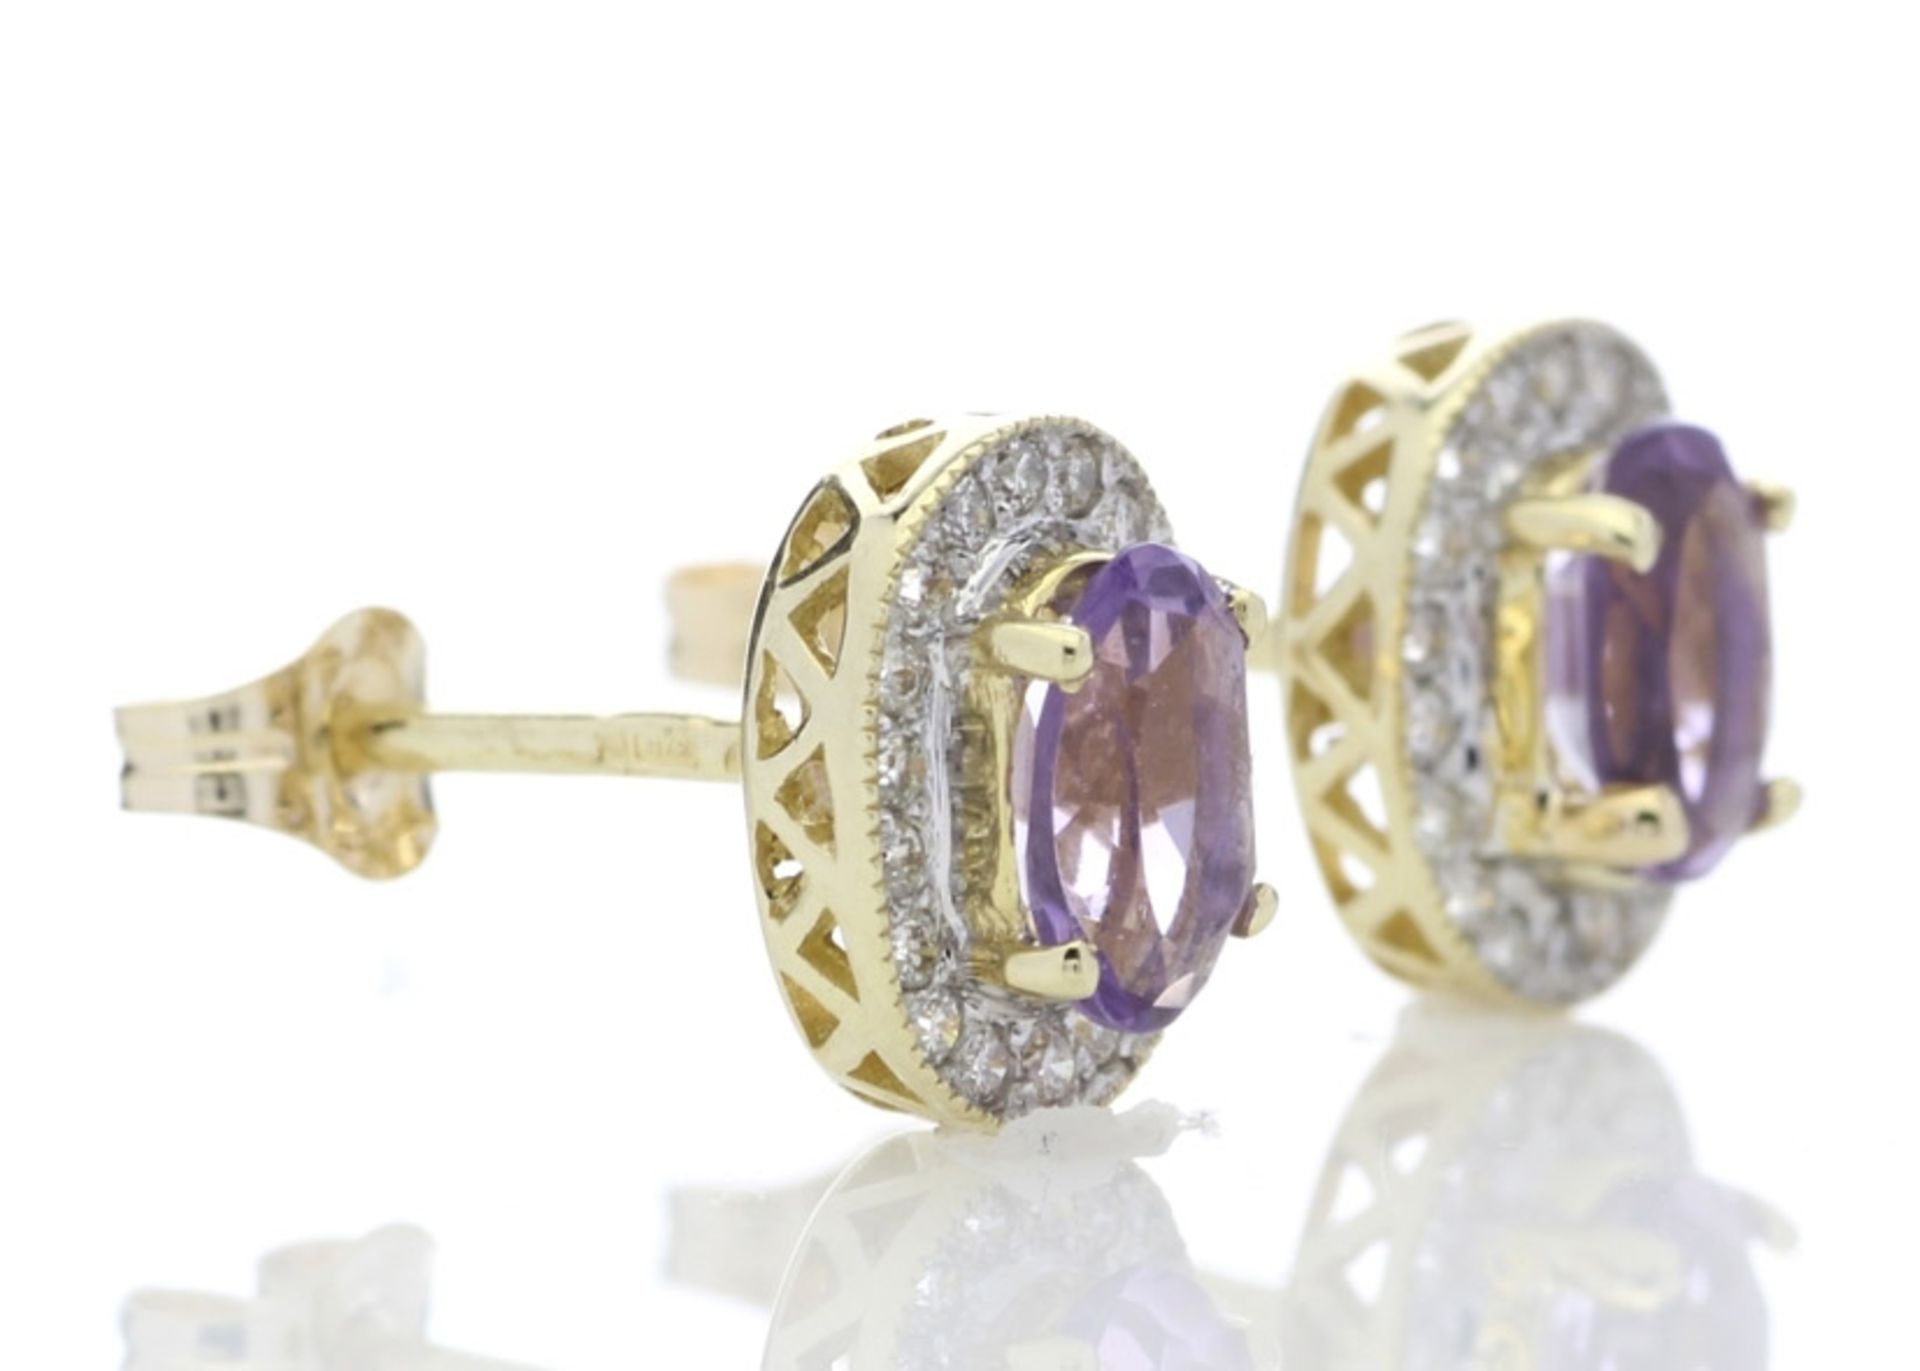 9ct Yellow Gold Amethyst and Diamond Cluster Earring 0.18 Carats - Valued by GIE £1,879.00 - 9ct - Image 4 of 7